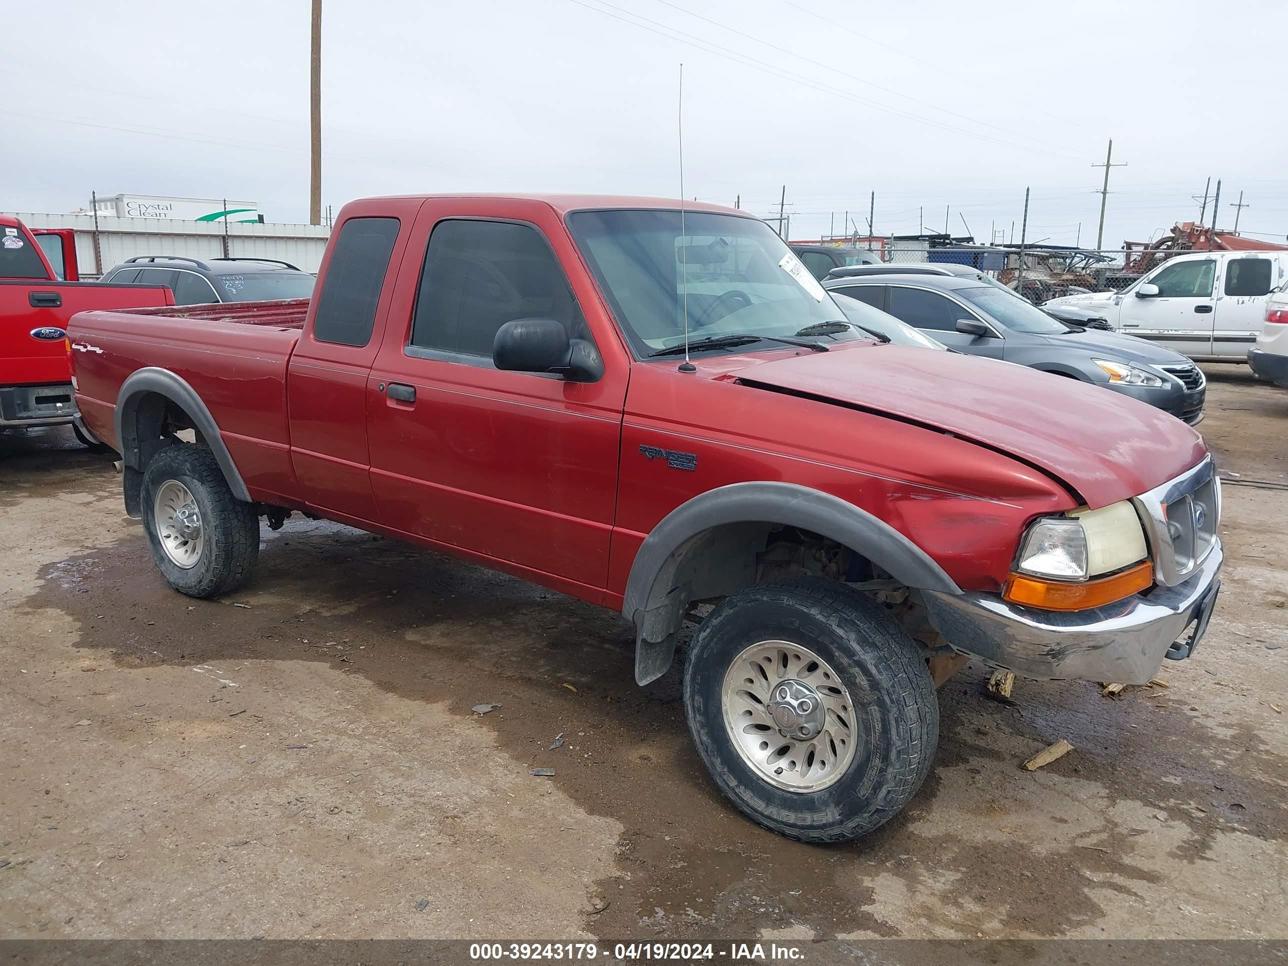 vin: 1FTZR15V4XPB90569 1FTZR15V4XPB90569 1999 ford ranger 3000 for Sale in 79415, 5311 N County Road 2000, Lubbock, Texas, USA